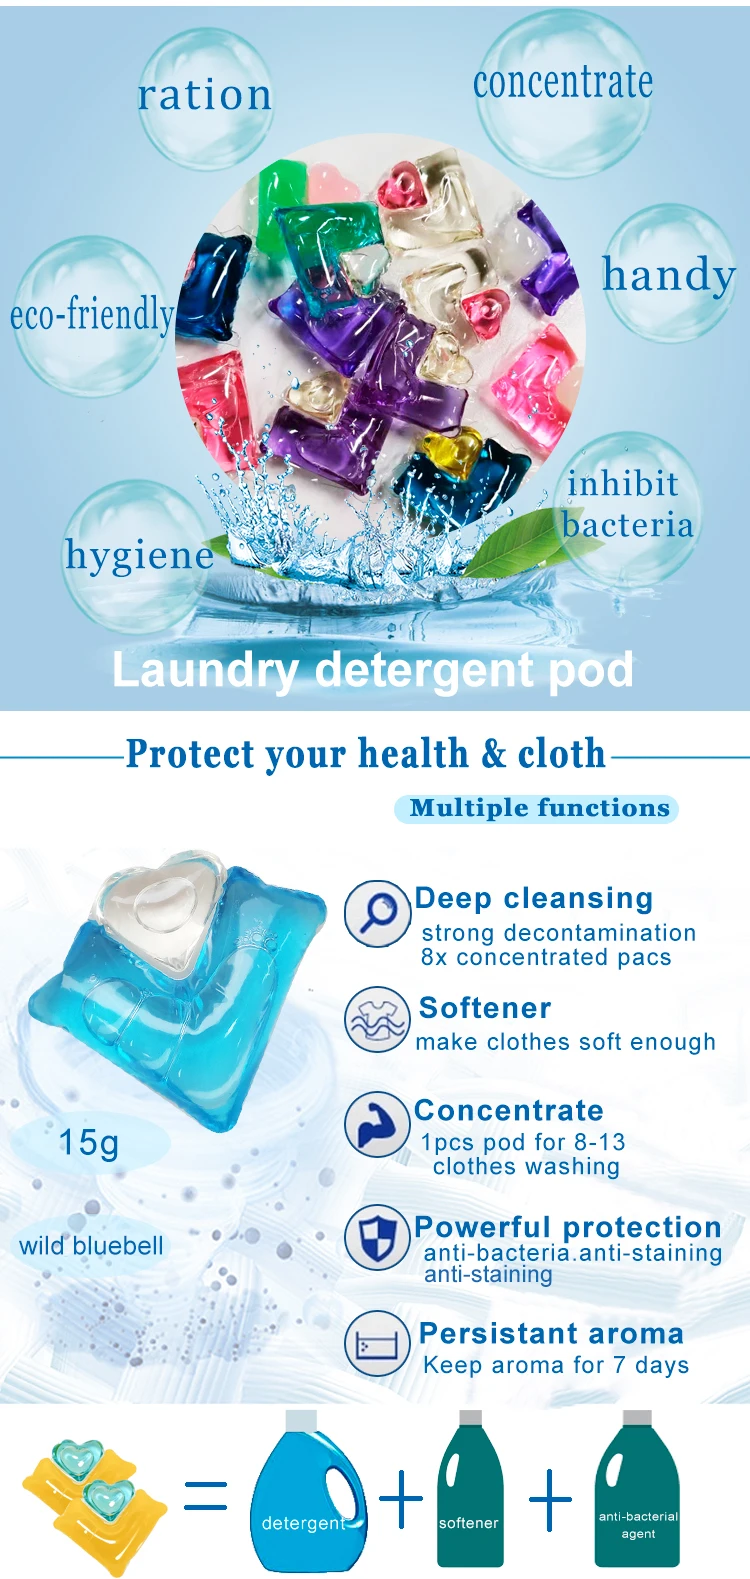 Family Laundry Detergent biodegr pod Long Lasting cleaning chemicals Laundry Detergent Stain cleaner detergent